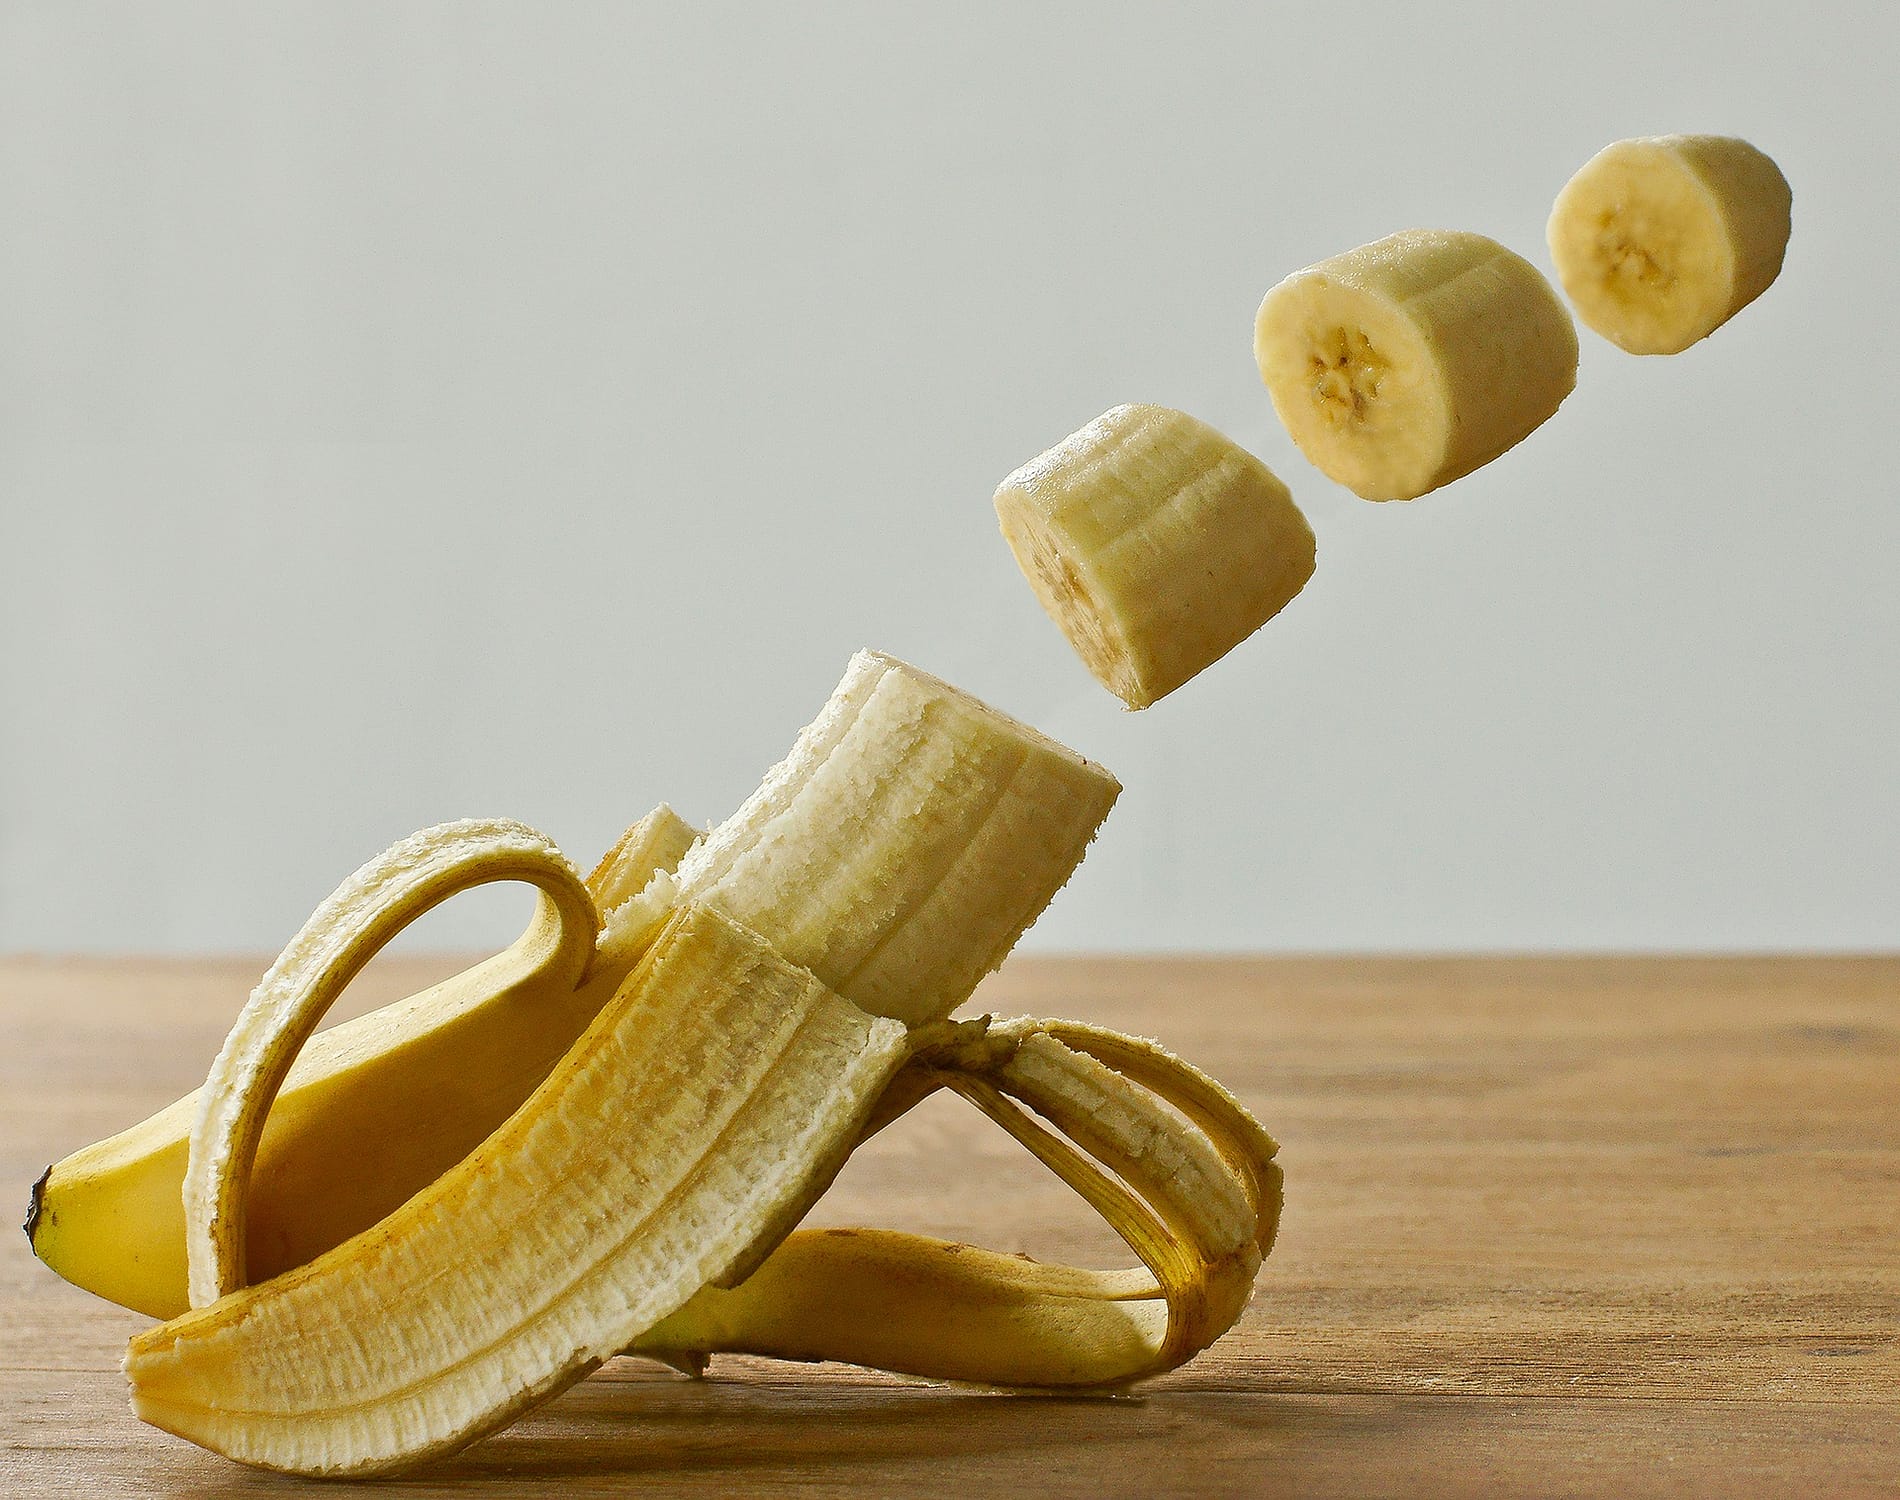 Ready for a Quick and Easy Peanut Butter and Banana Snack?